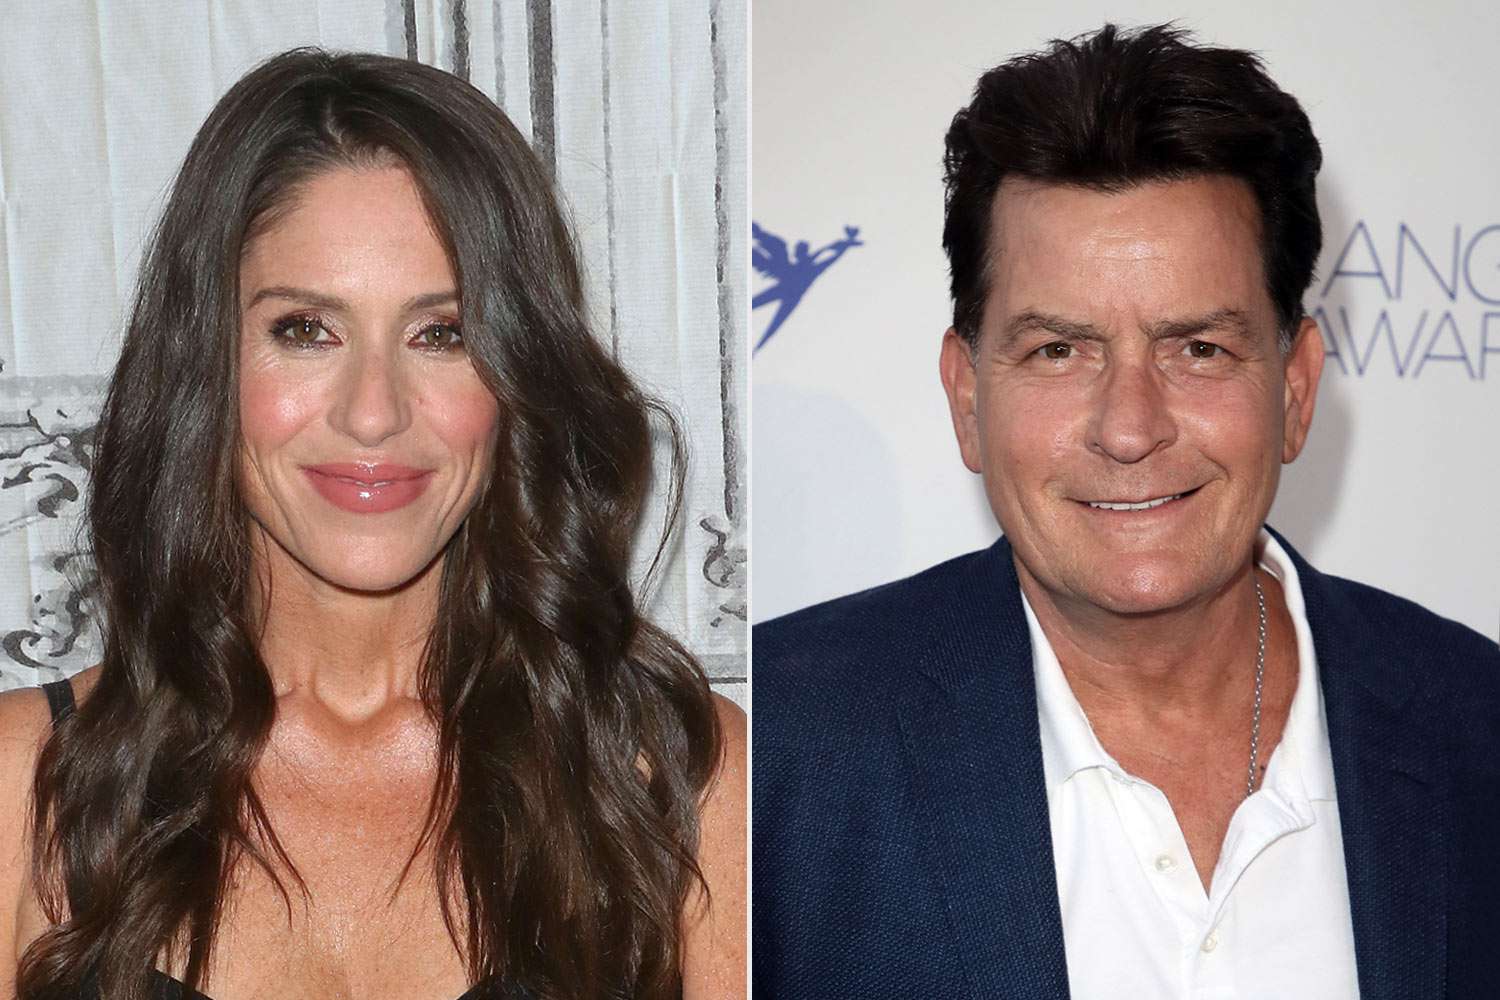 soleil moon frye and Charlie sheen